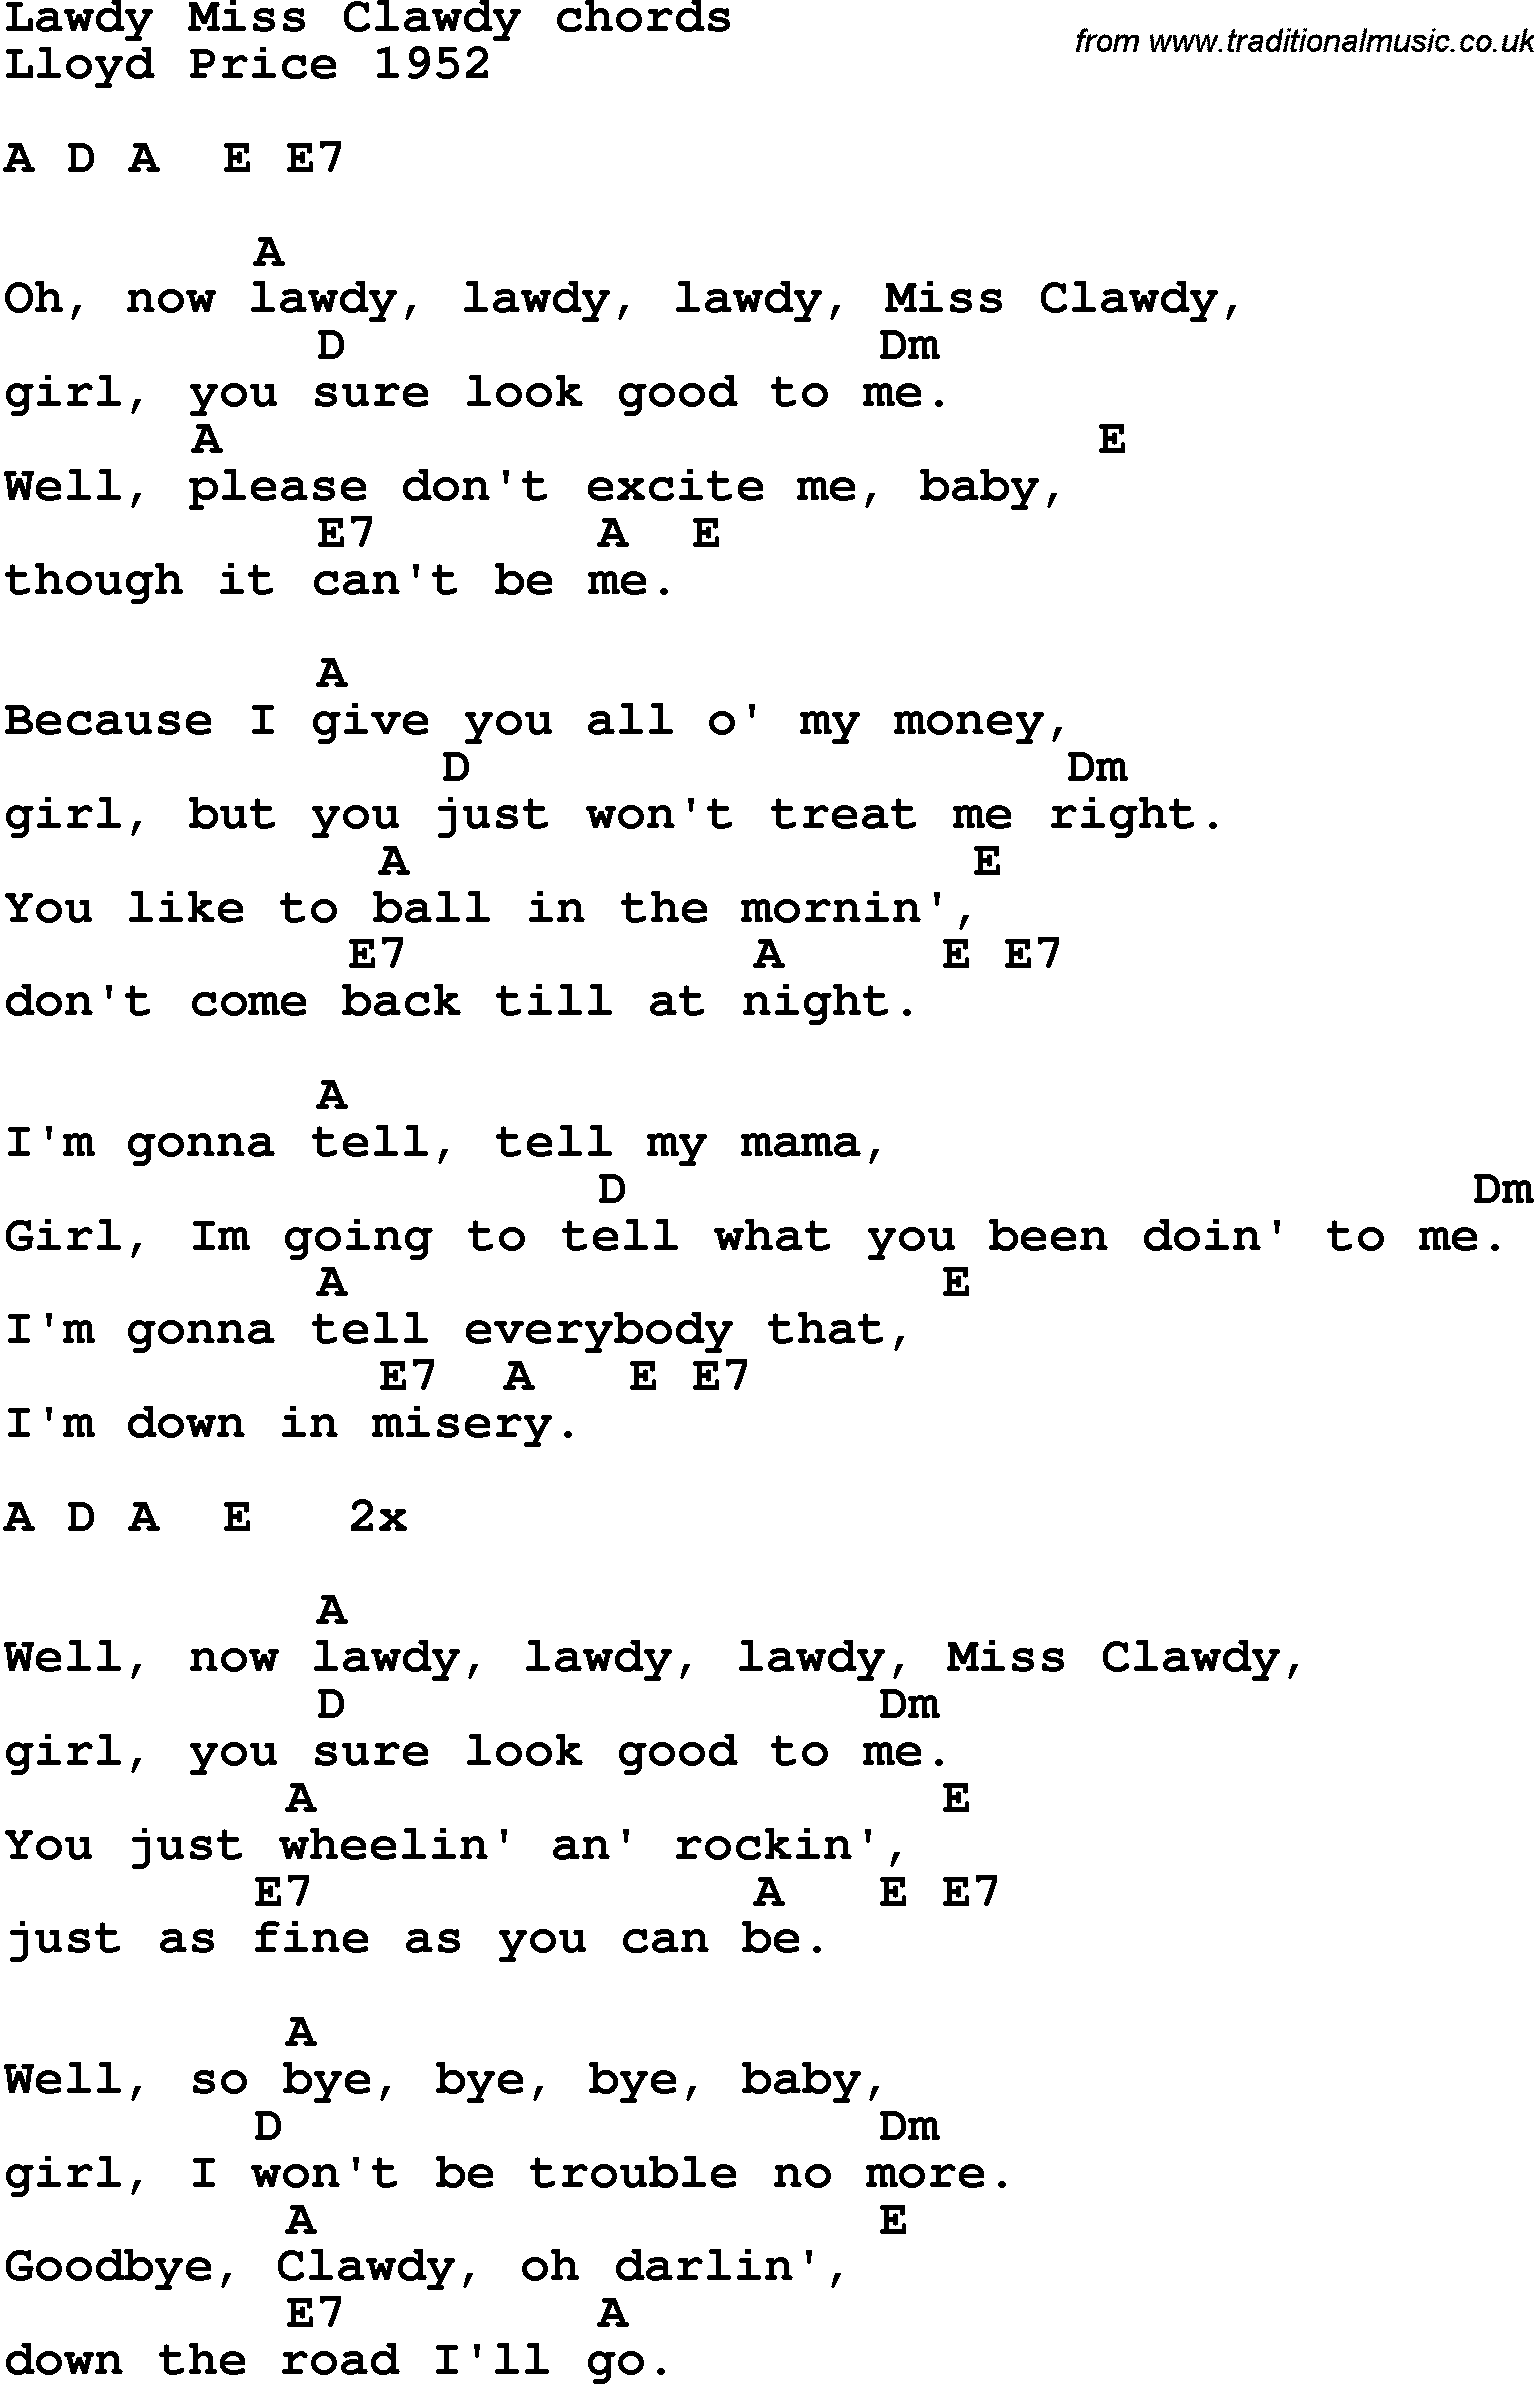 Song Lyrics with guitar chords for Lawdy Miss Clawdy